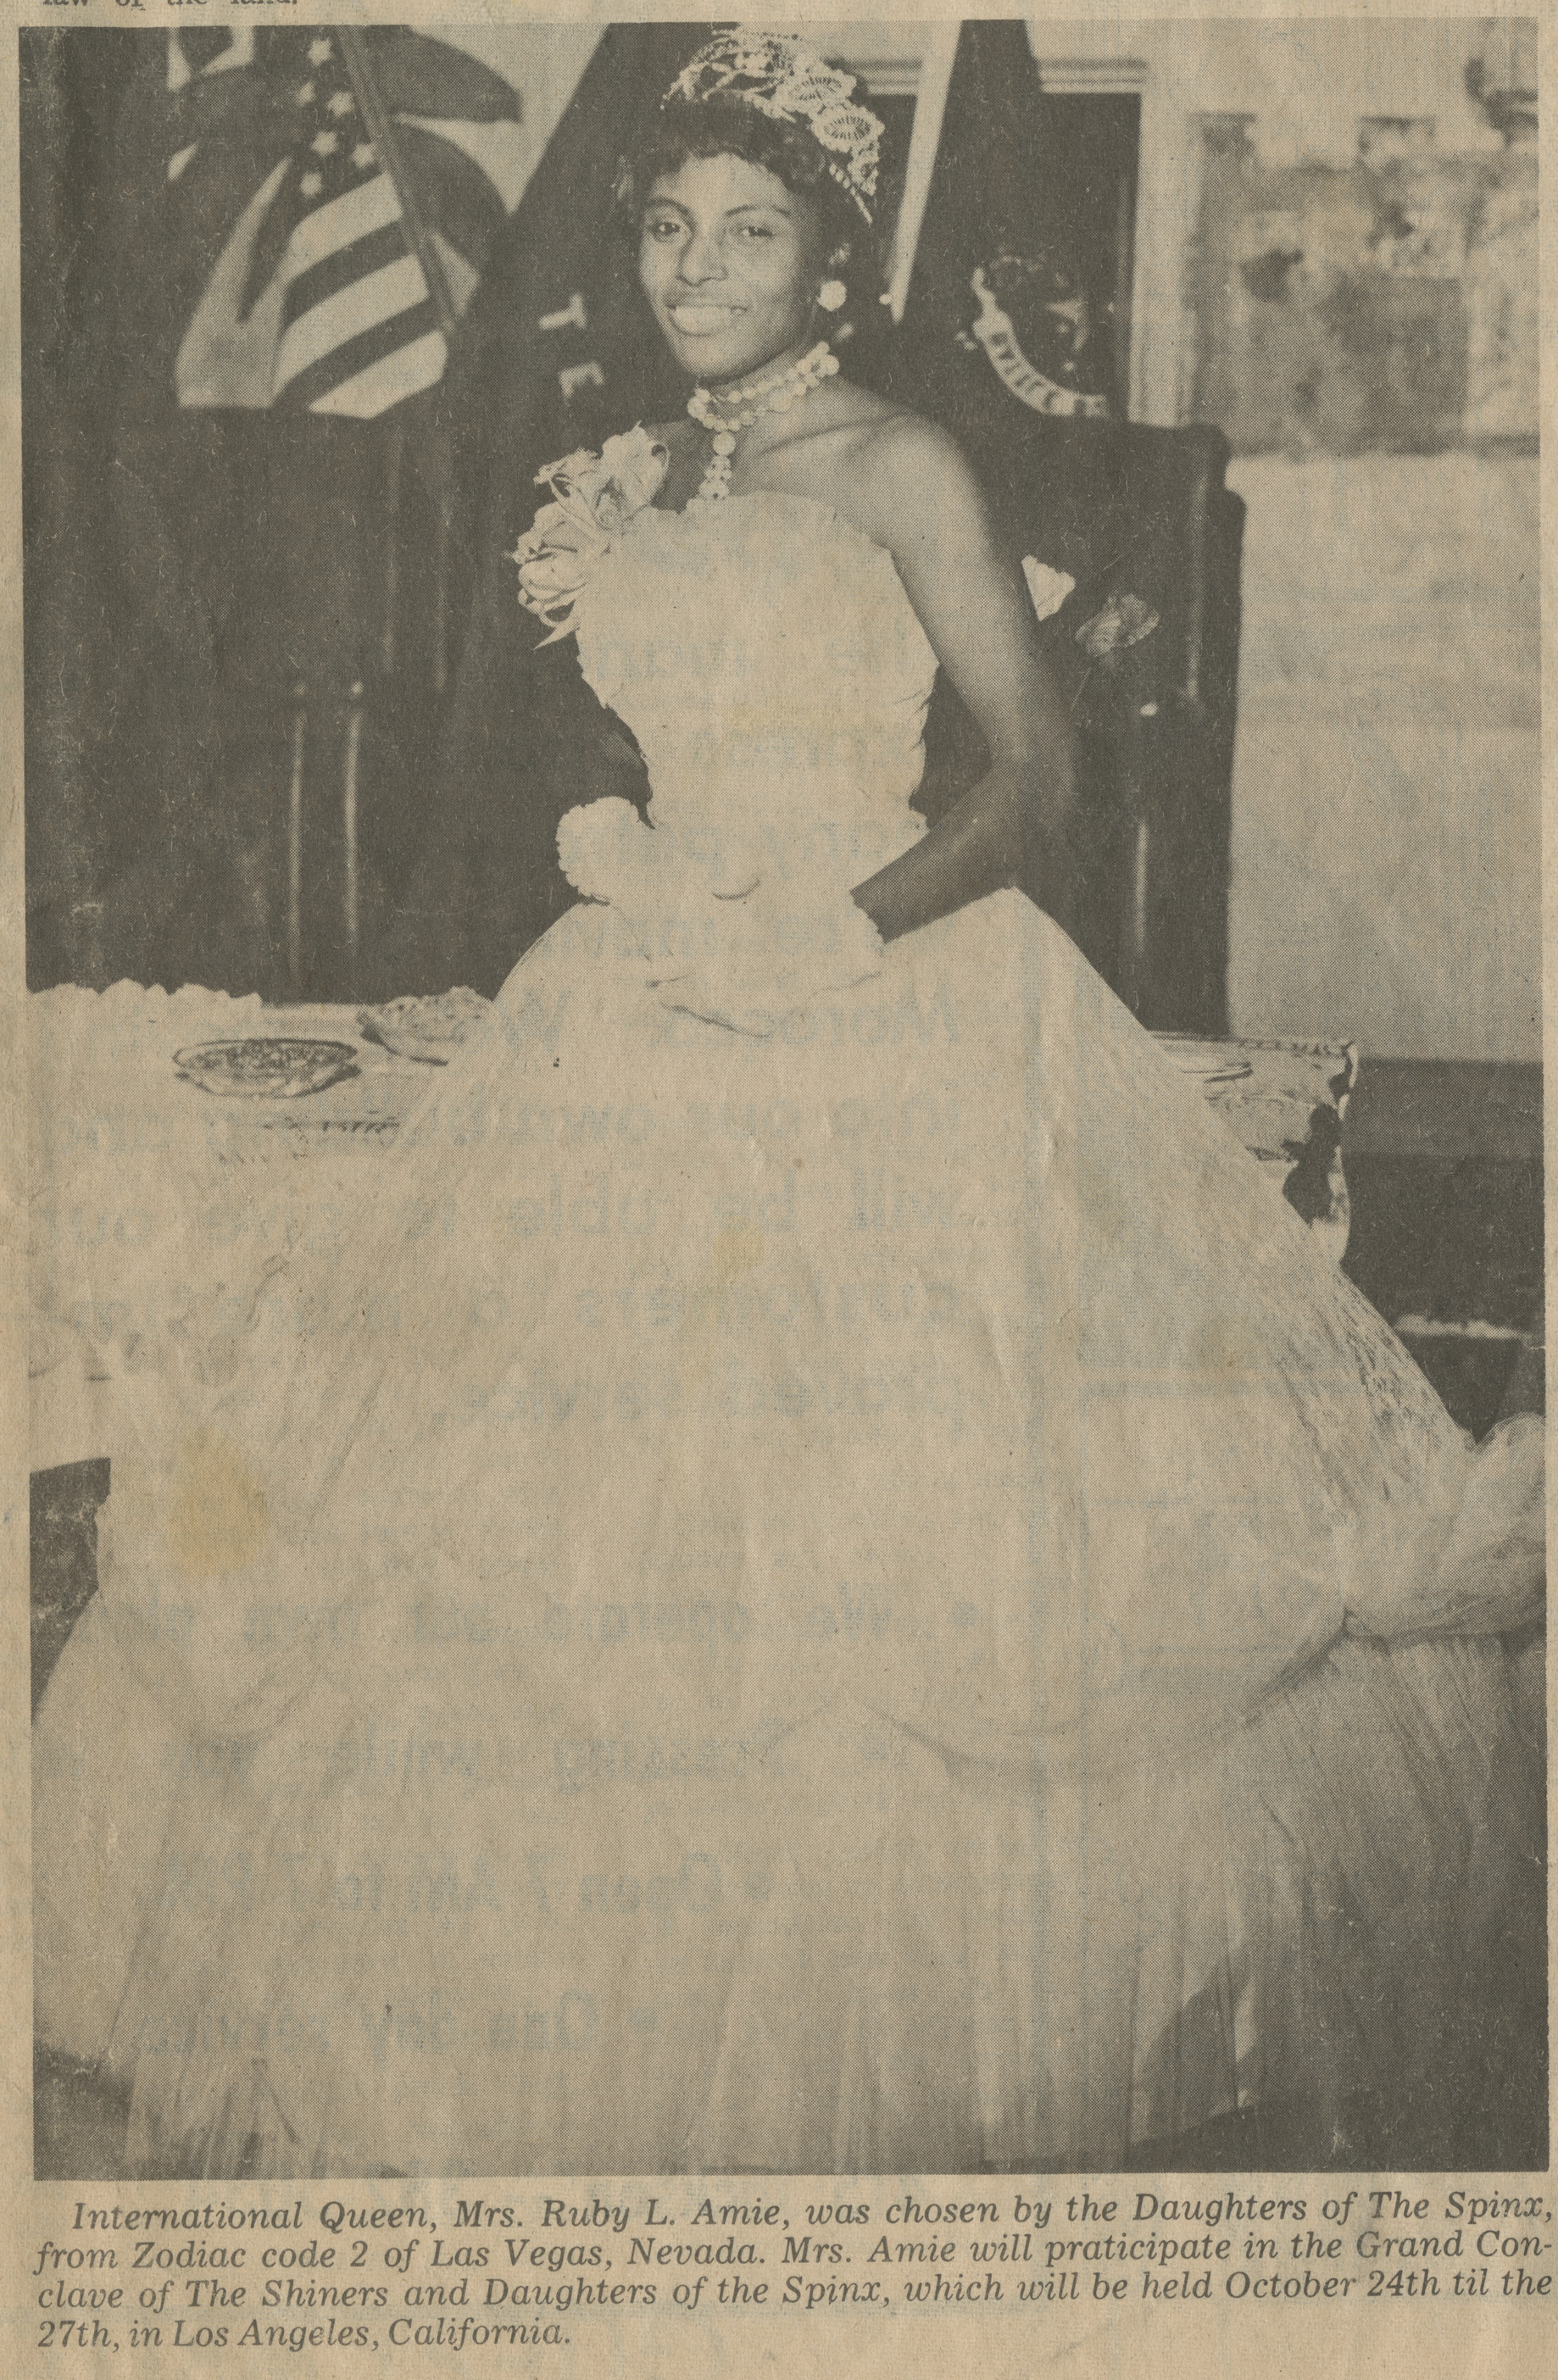 Newspaper clipping, Photograph of Mrs. Ruby L. Amie as International Queen of the Daughters of The Spinx [sic], from Zodiac code 2 of Las Vegas, Nevada, Nevada Enterprise and News Advertiser, Vol. I, No. 21, November 1, 1963